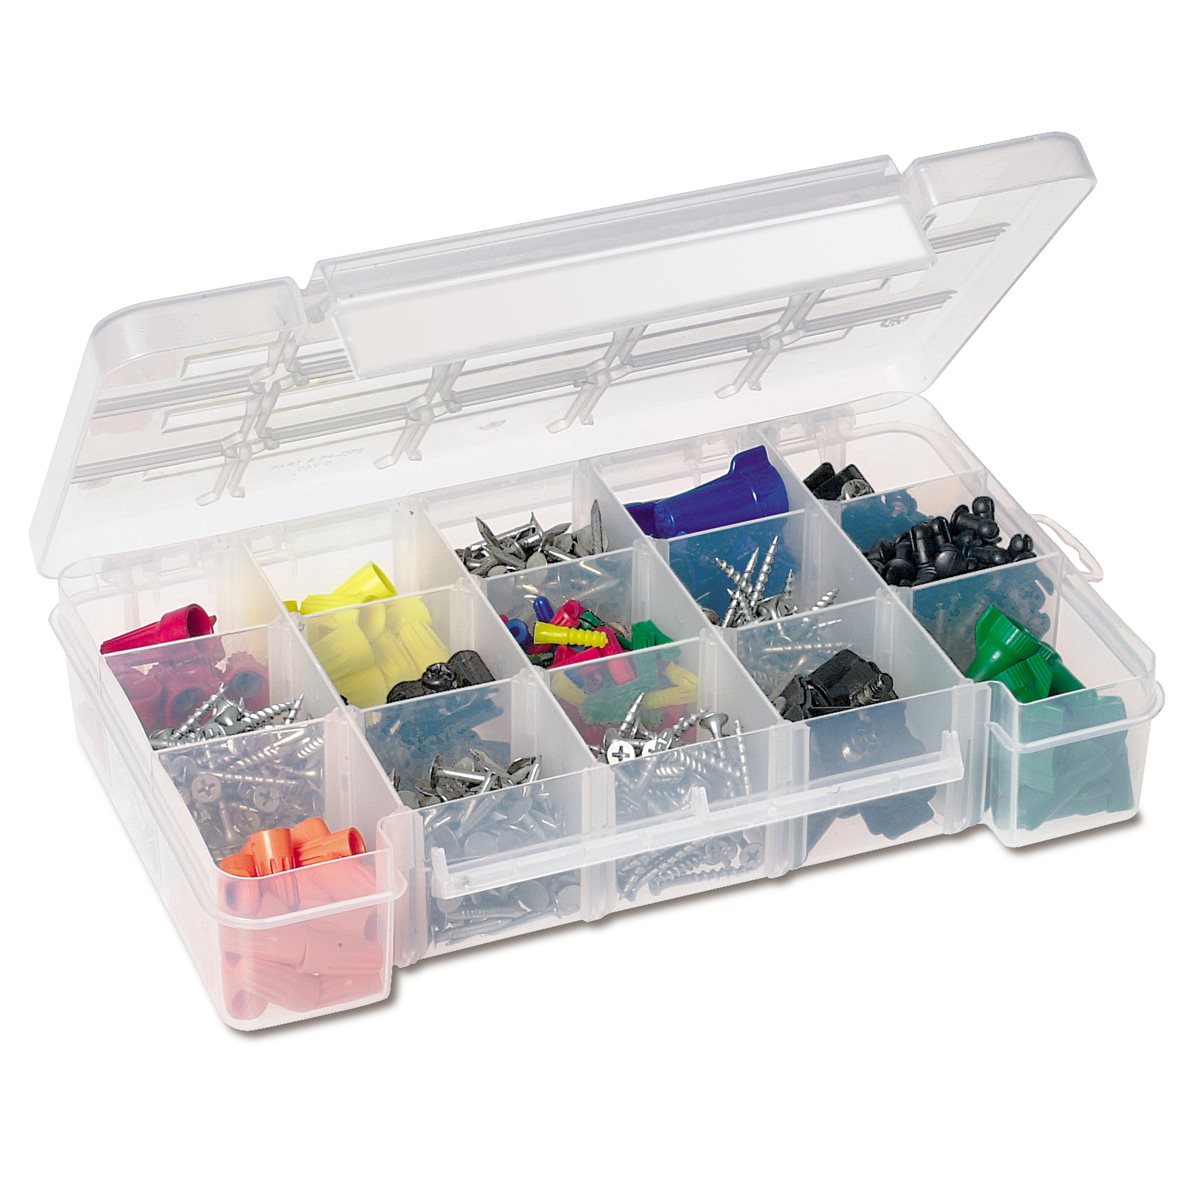 Plastic Storage Containers with Lids for Organizing - (Small 11 X